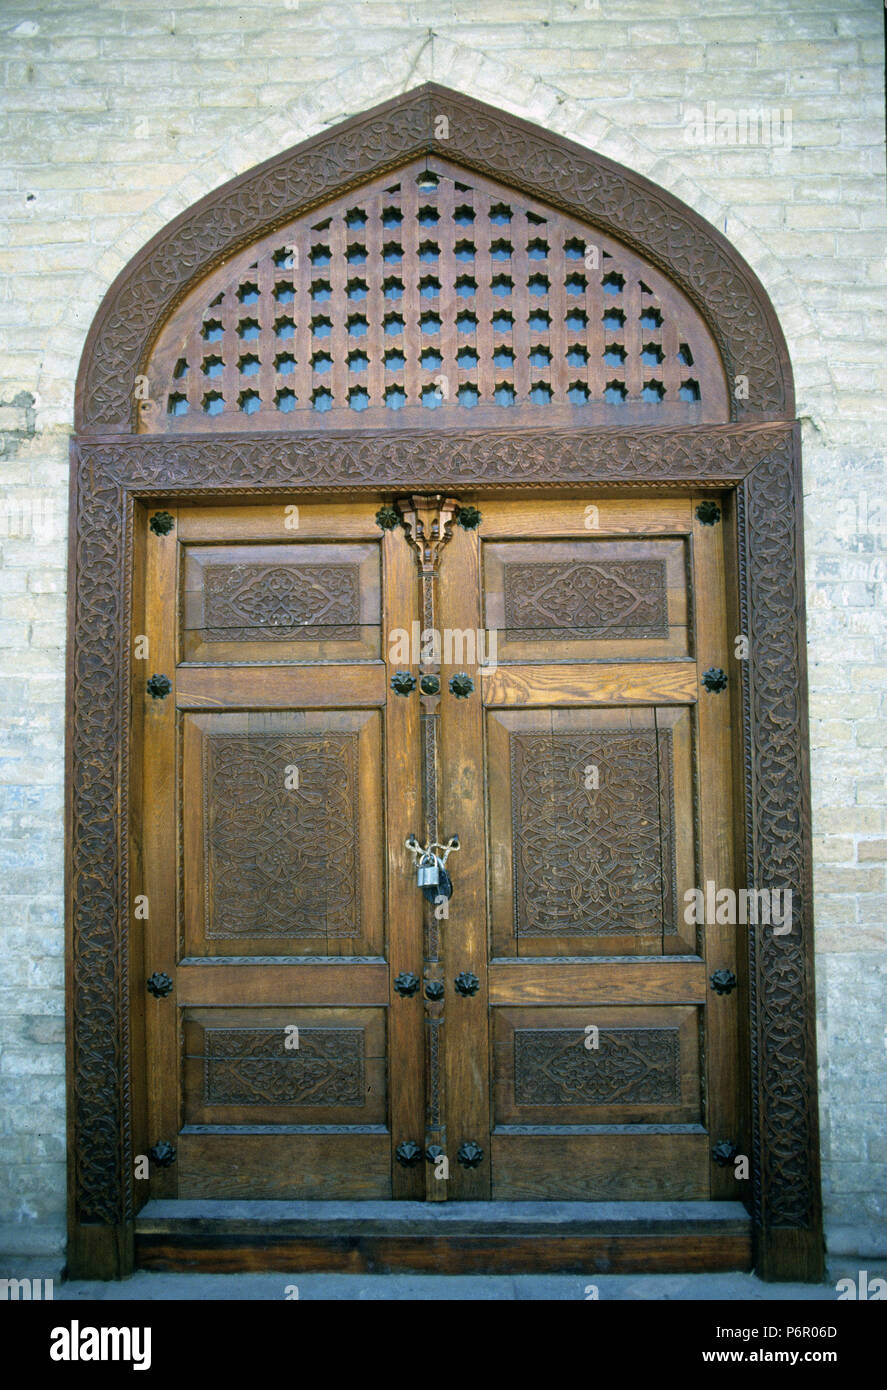 Wooden carved gate in the Sitorai Mohi Khosa Palace, the summer residence of the last Emir of Bukhara, undated analogue image from October 1992. The historical, mostly Islamic center of Bukhara was declared a UNESCO World Heritage Site in 1993, the state of Uzbekistan attained after the collapse of the Soviet Union 01.09.1991 his independence. Photo: Matthias Toedt/dpa central image/ZB/picture alliance | usage worldwide Stock Photo